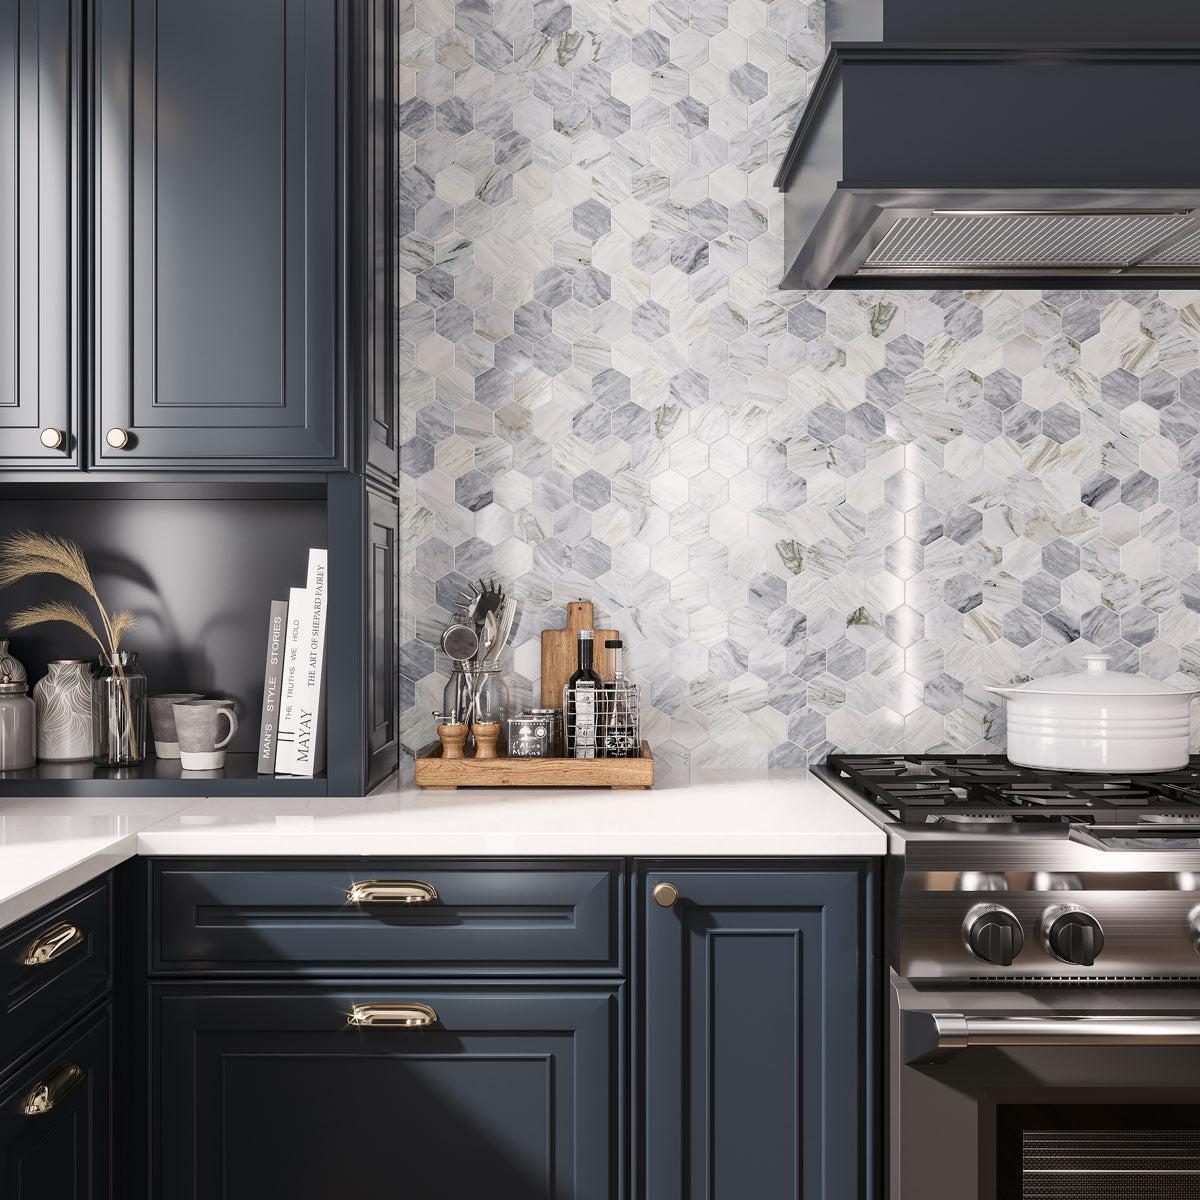 Timeless kitchen design with navy blue cabinet paint and Calacatta Bluette marble hexagon backsplash tile